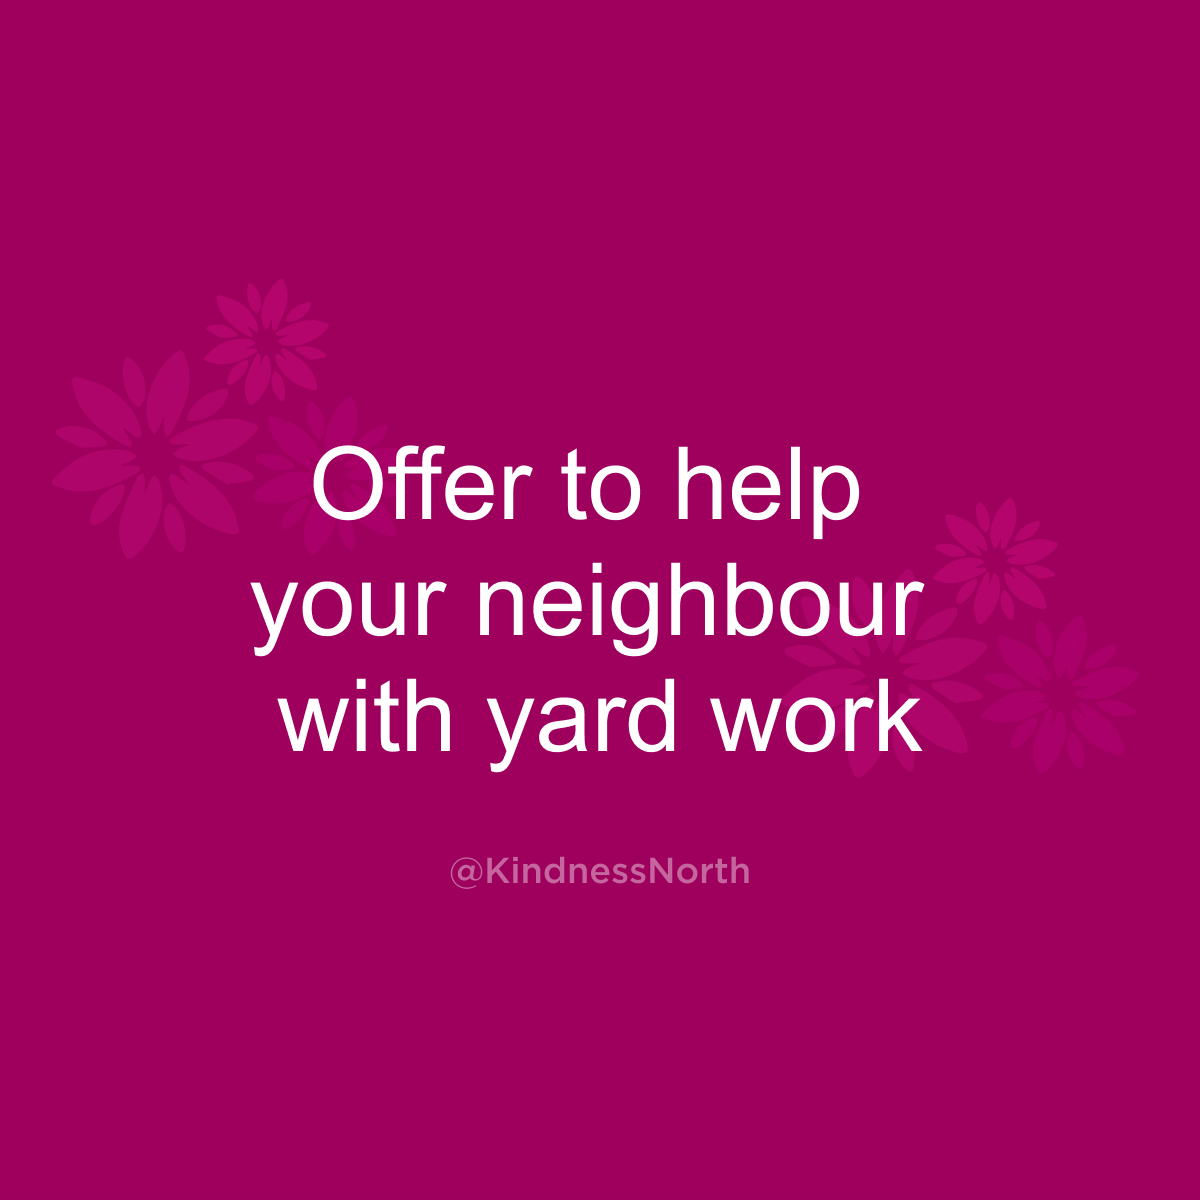 Offer to help your neighbour with yard work